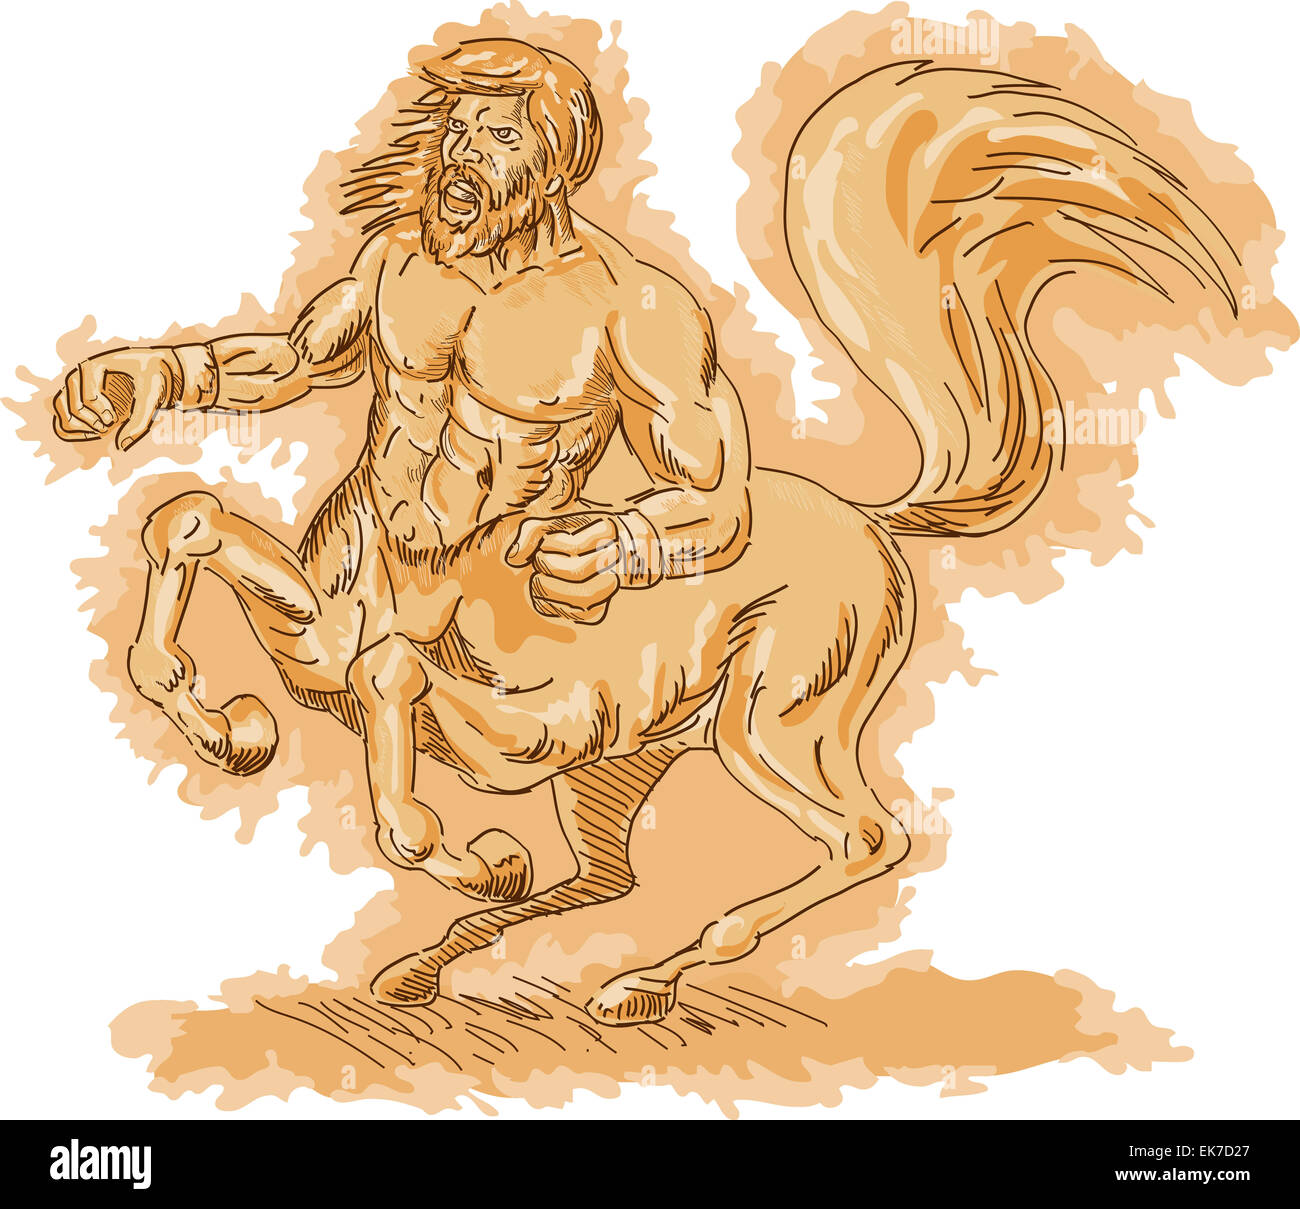 Centaur angry and rearing up Stock Photo